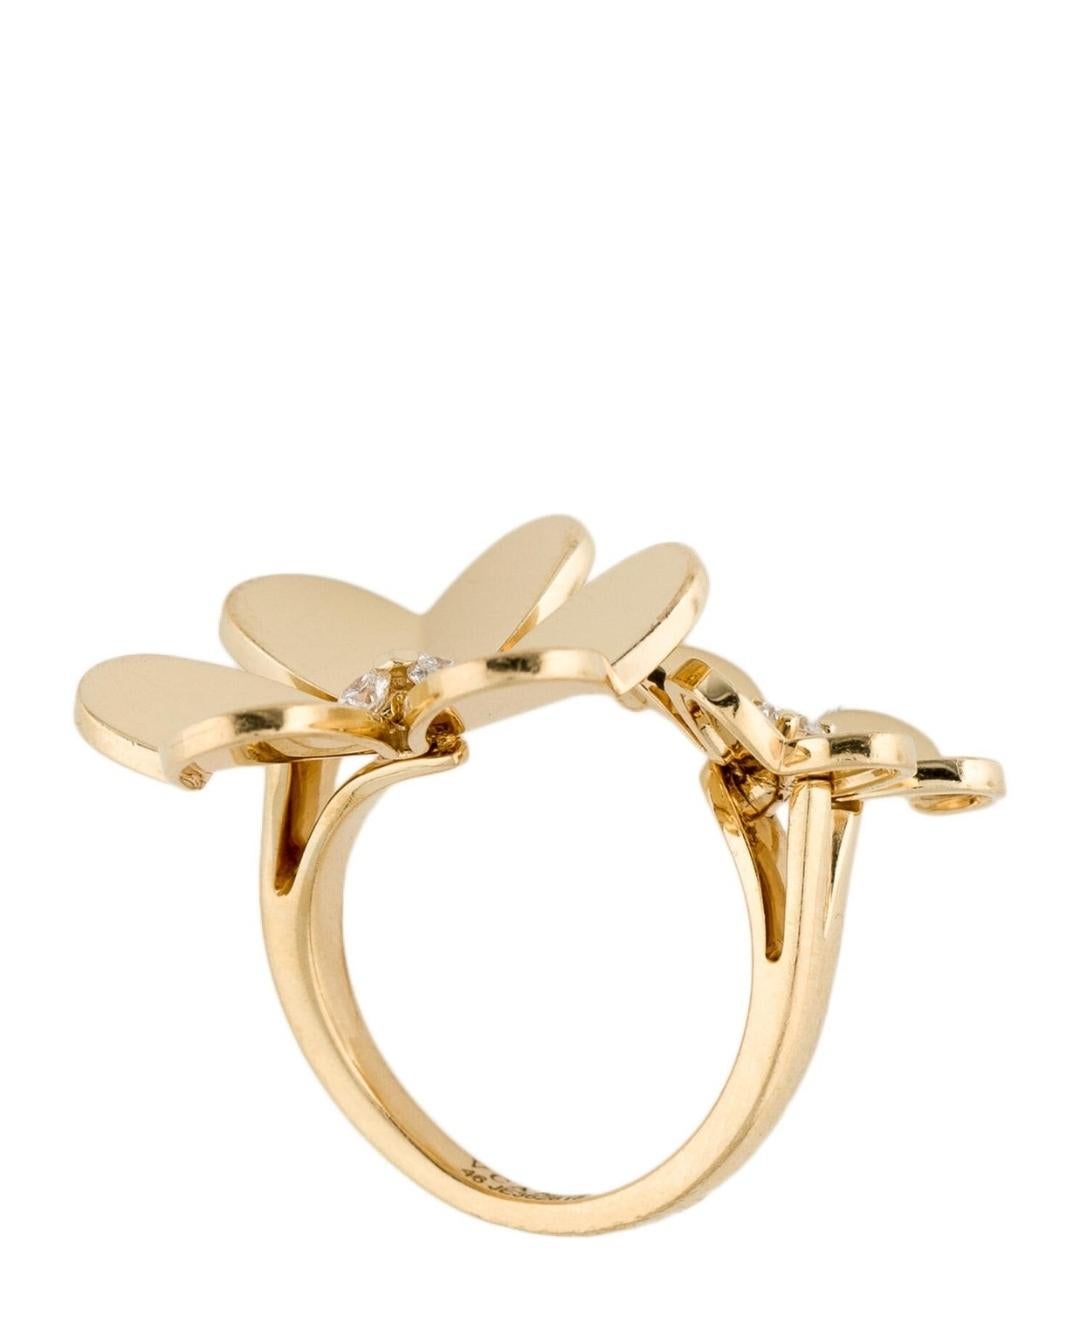 Contemporary Van Cleef & Arpels Frivole Double Flowers Ring In 18Kt Yellow Gold With Diamonds